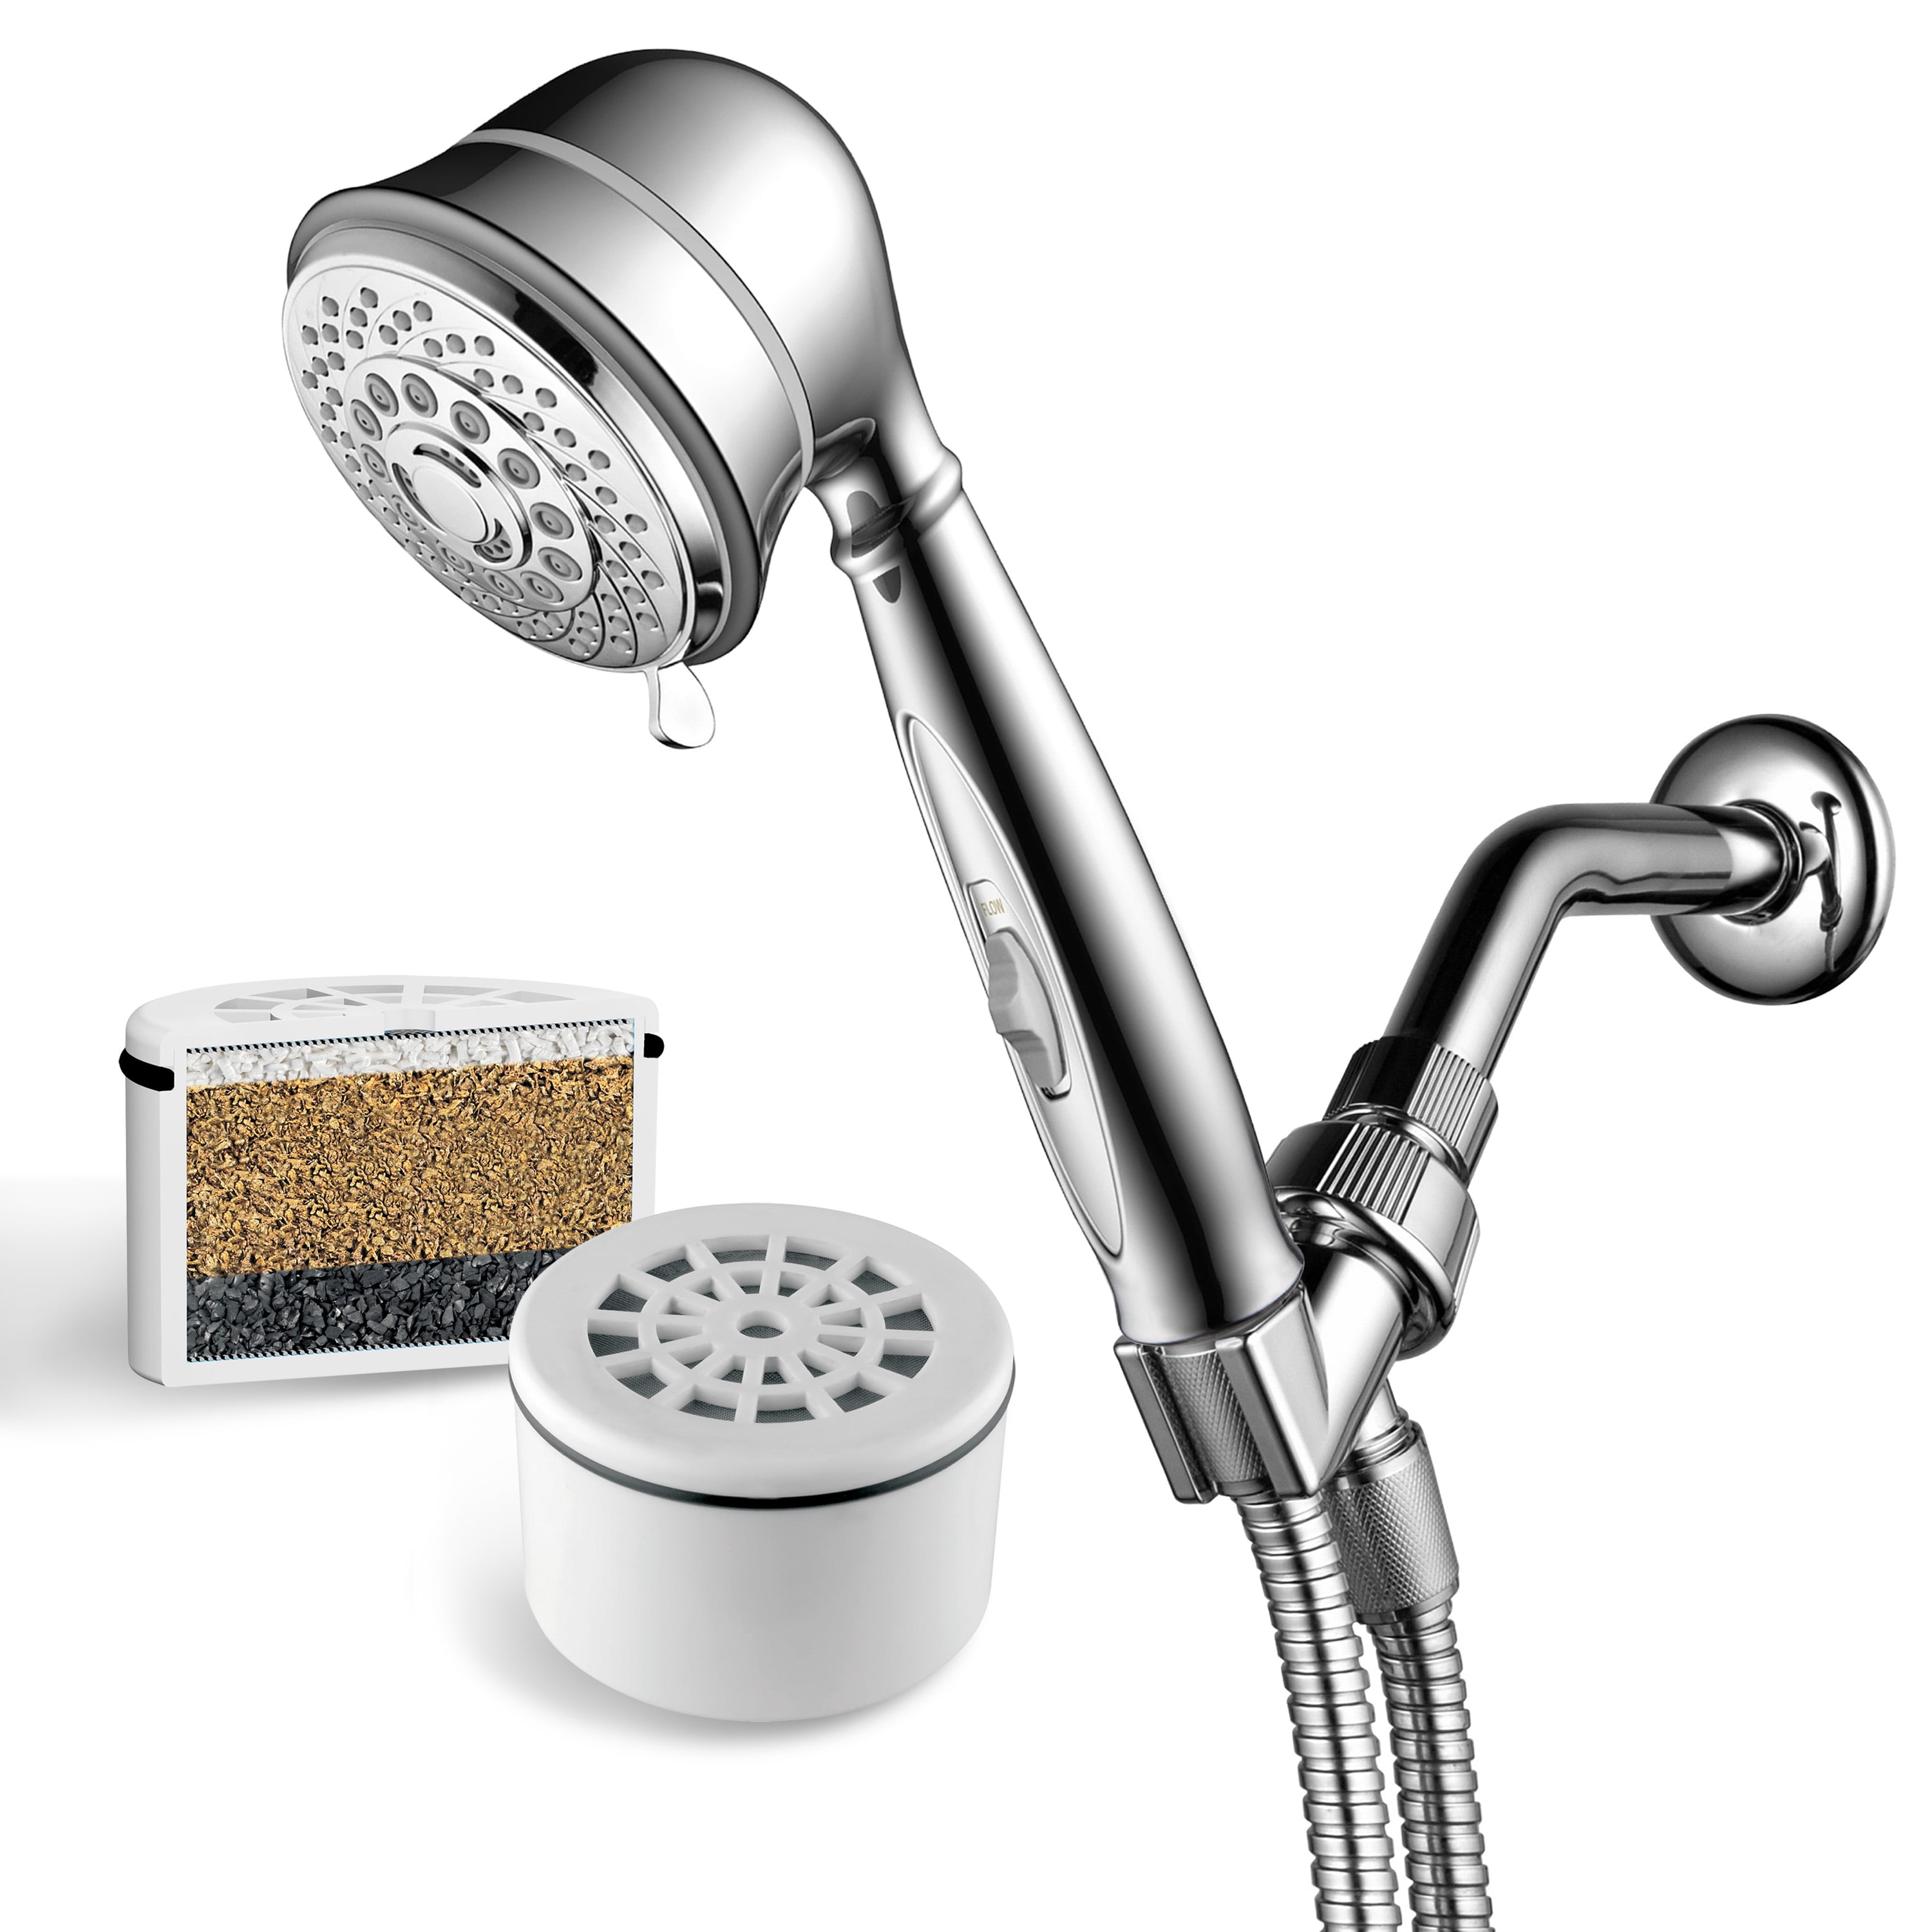 Premium Chrome HotelSpa 7-Setting AquaCare Series Spiral Handheld Shower Head with Patented ON/OFF Pause Switch and 5-7 foot Stretchable Stainless Steel Hose 